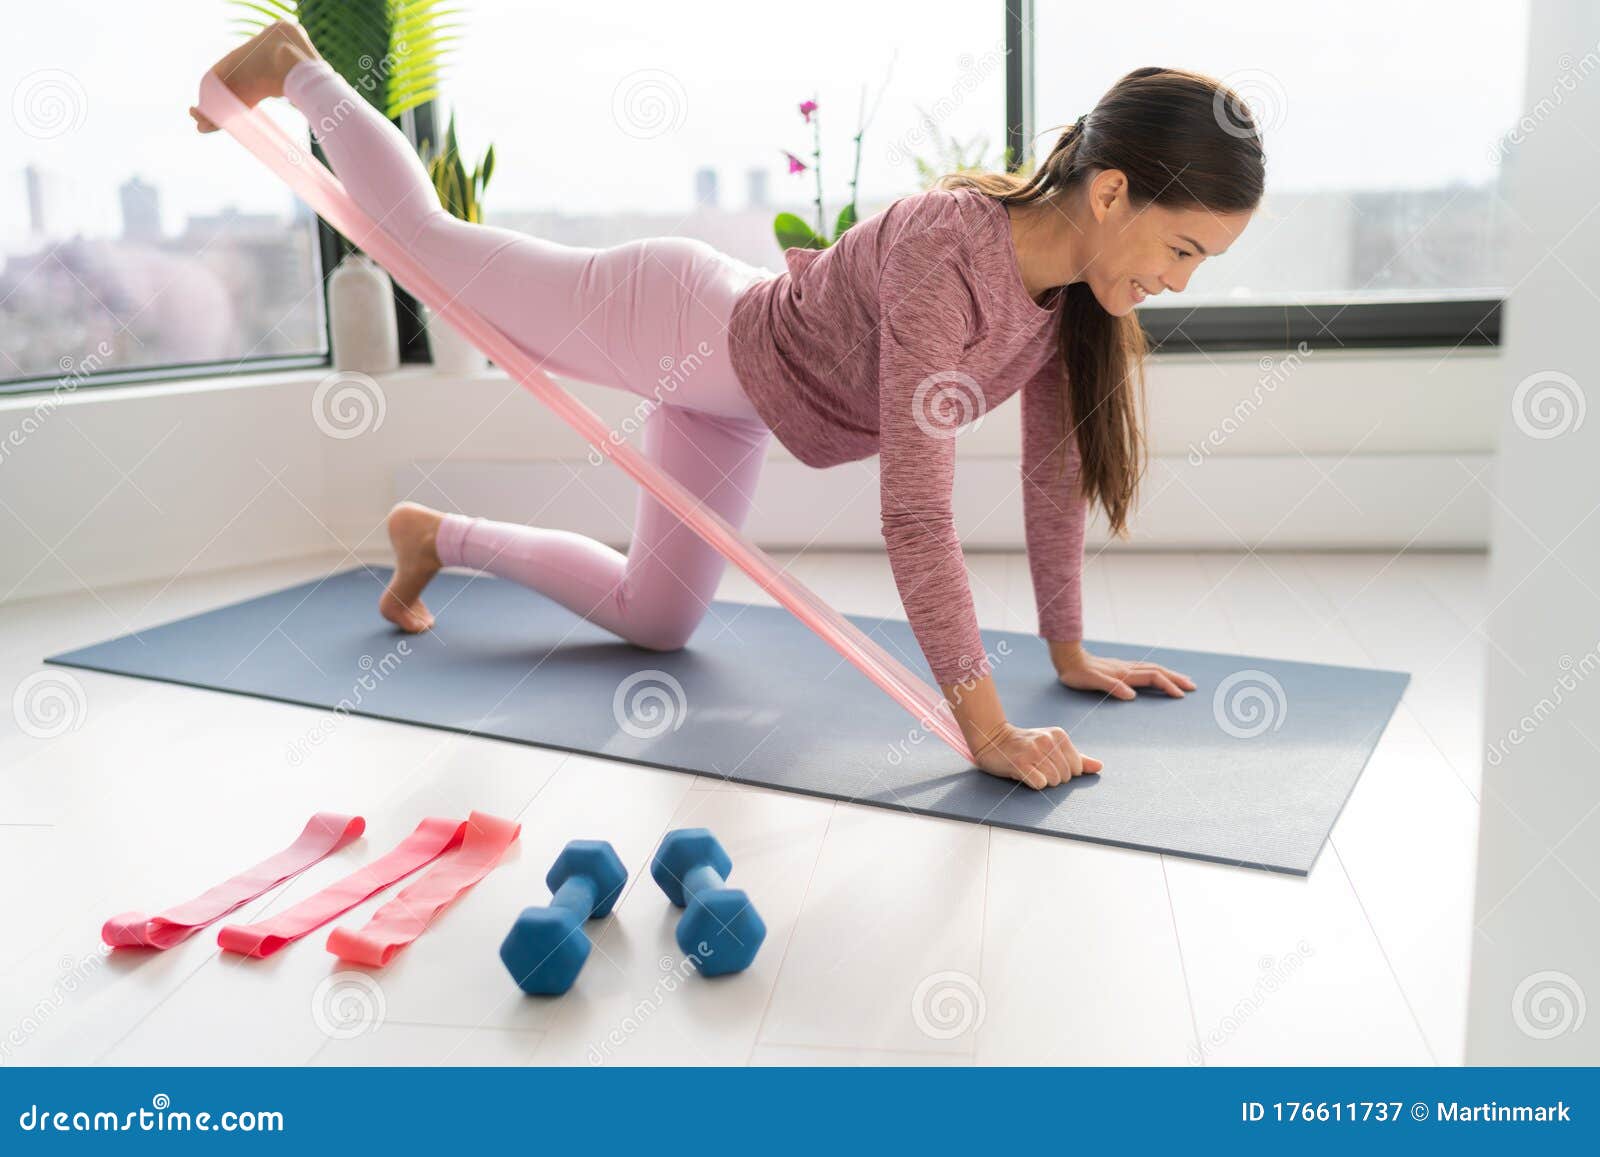 Standing Glutes Leg Stretch Fitness Woman Workout Stock Photo